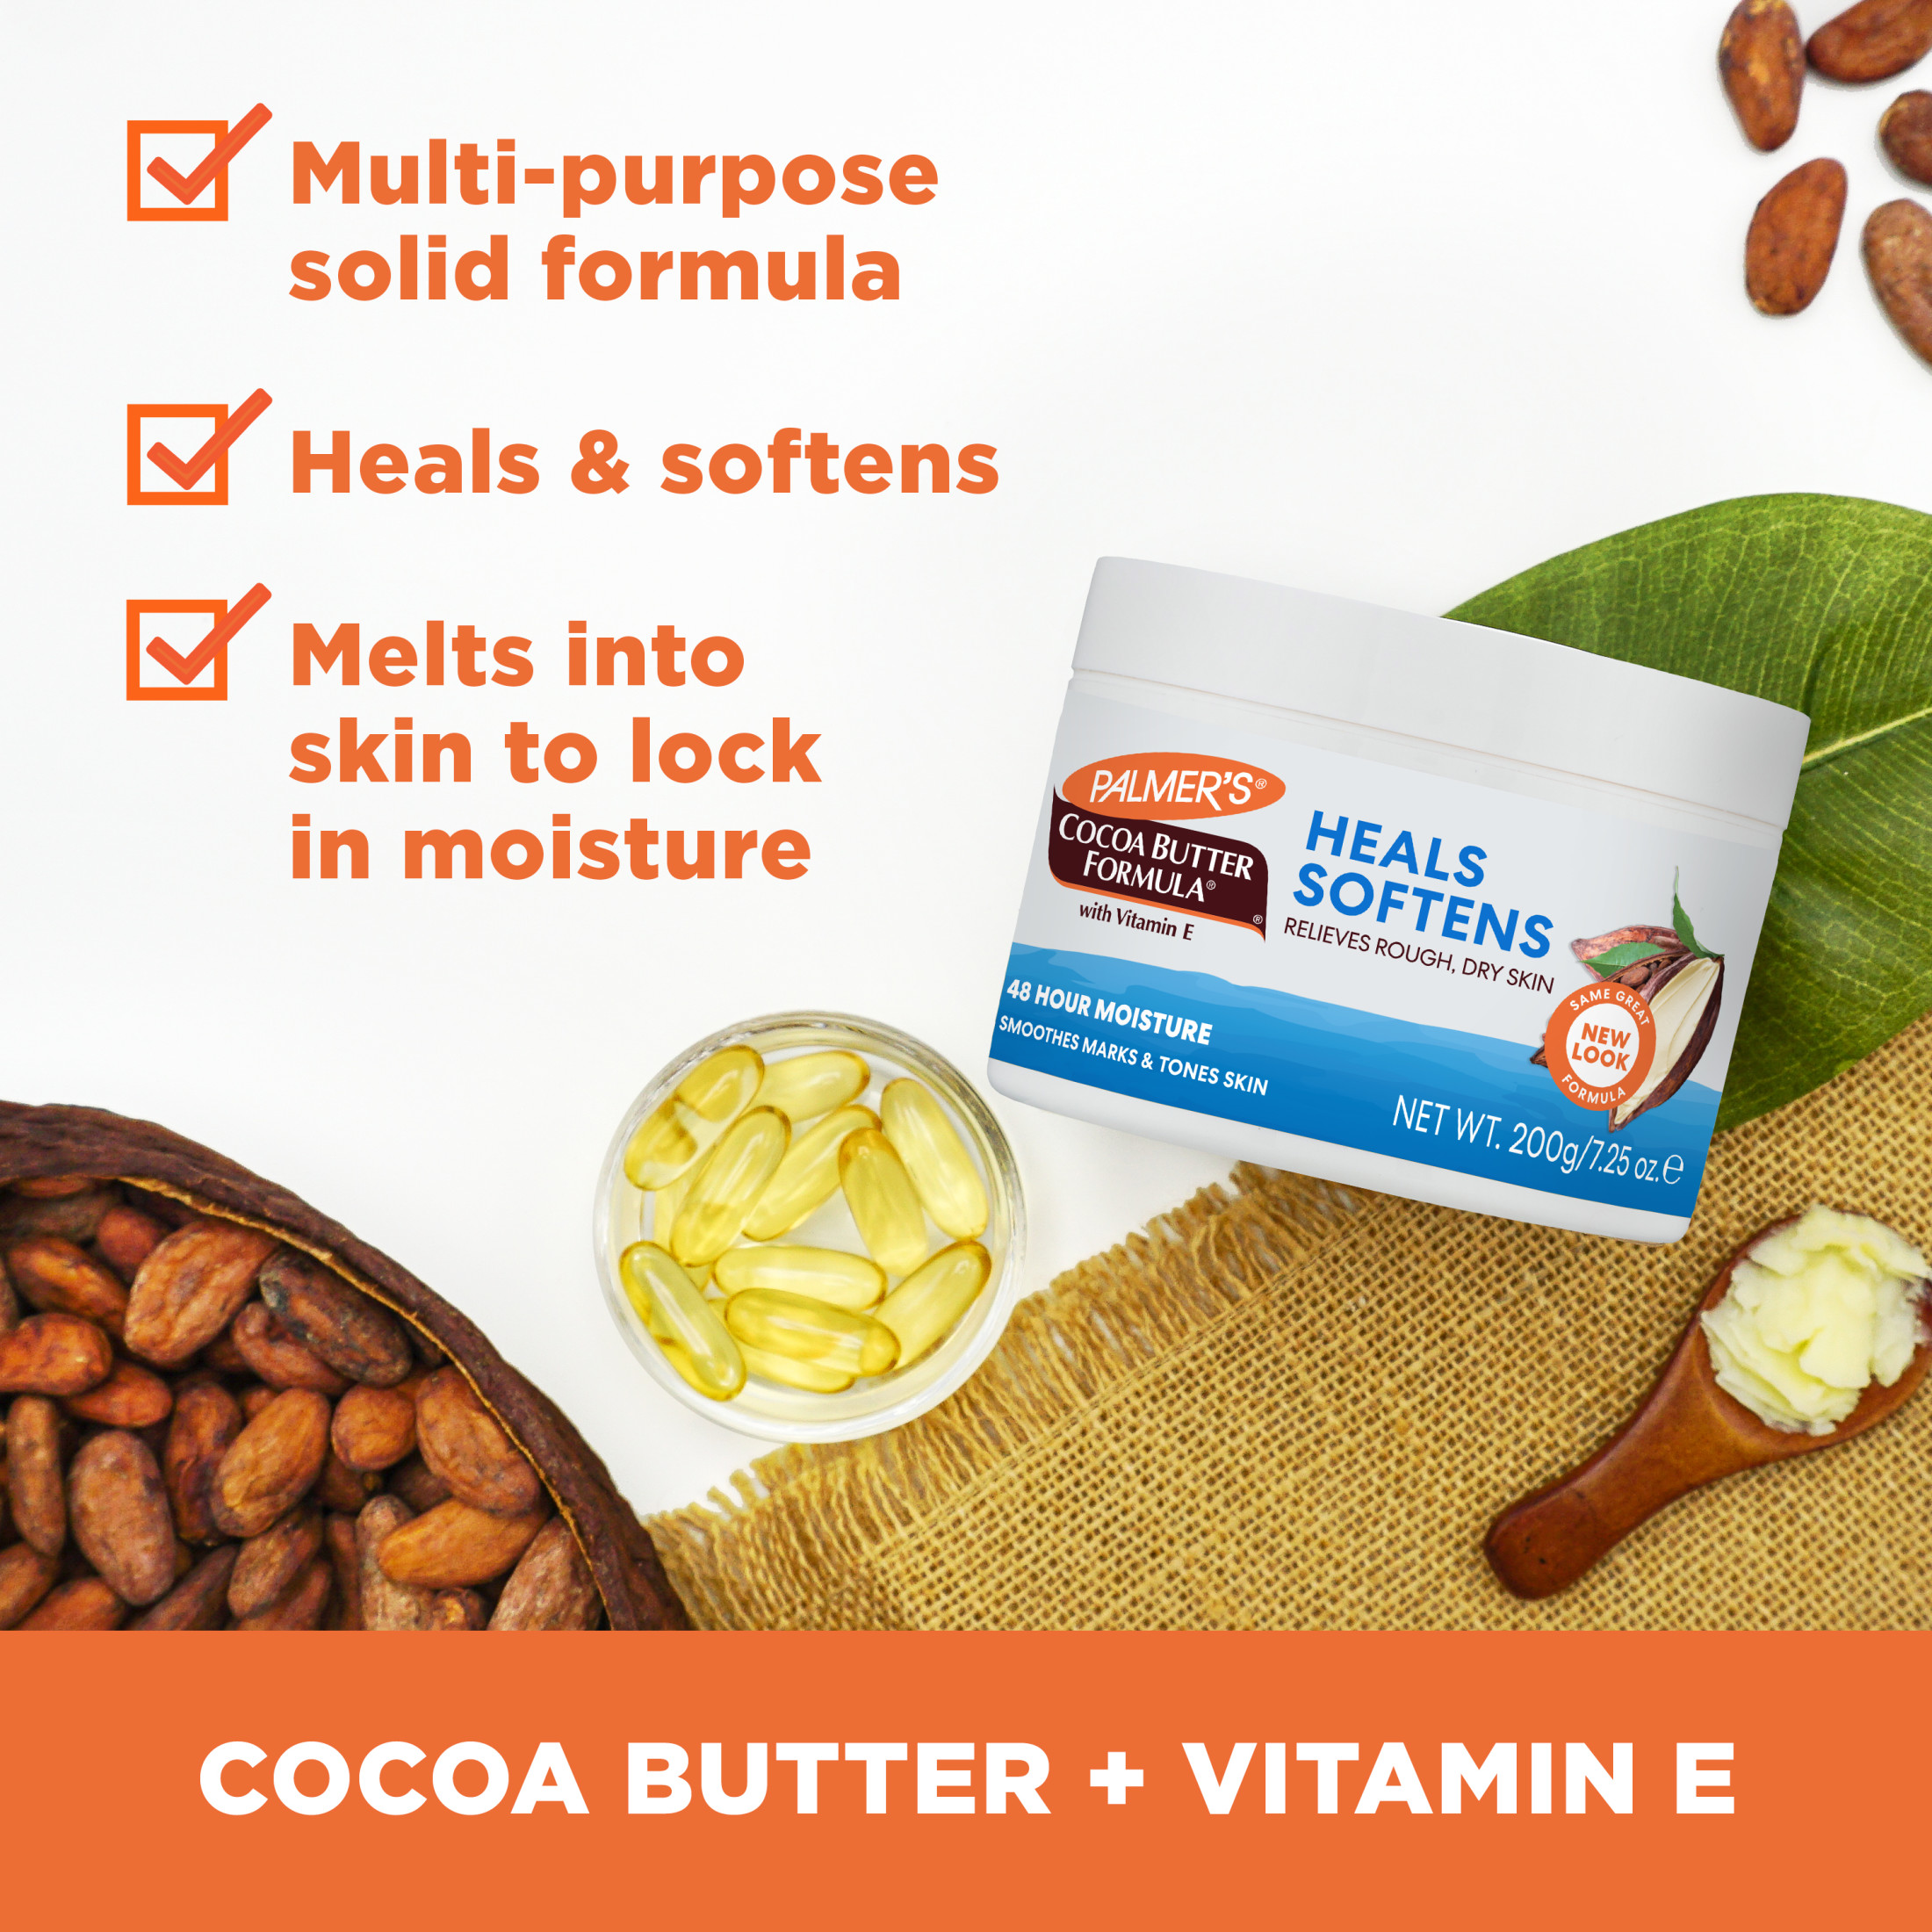 Palmer's Cocoa Butter Formula Solid Balm, 7.25 oz. - image 4 of 18